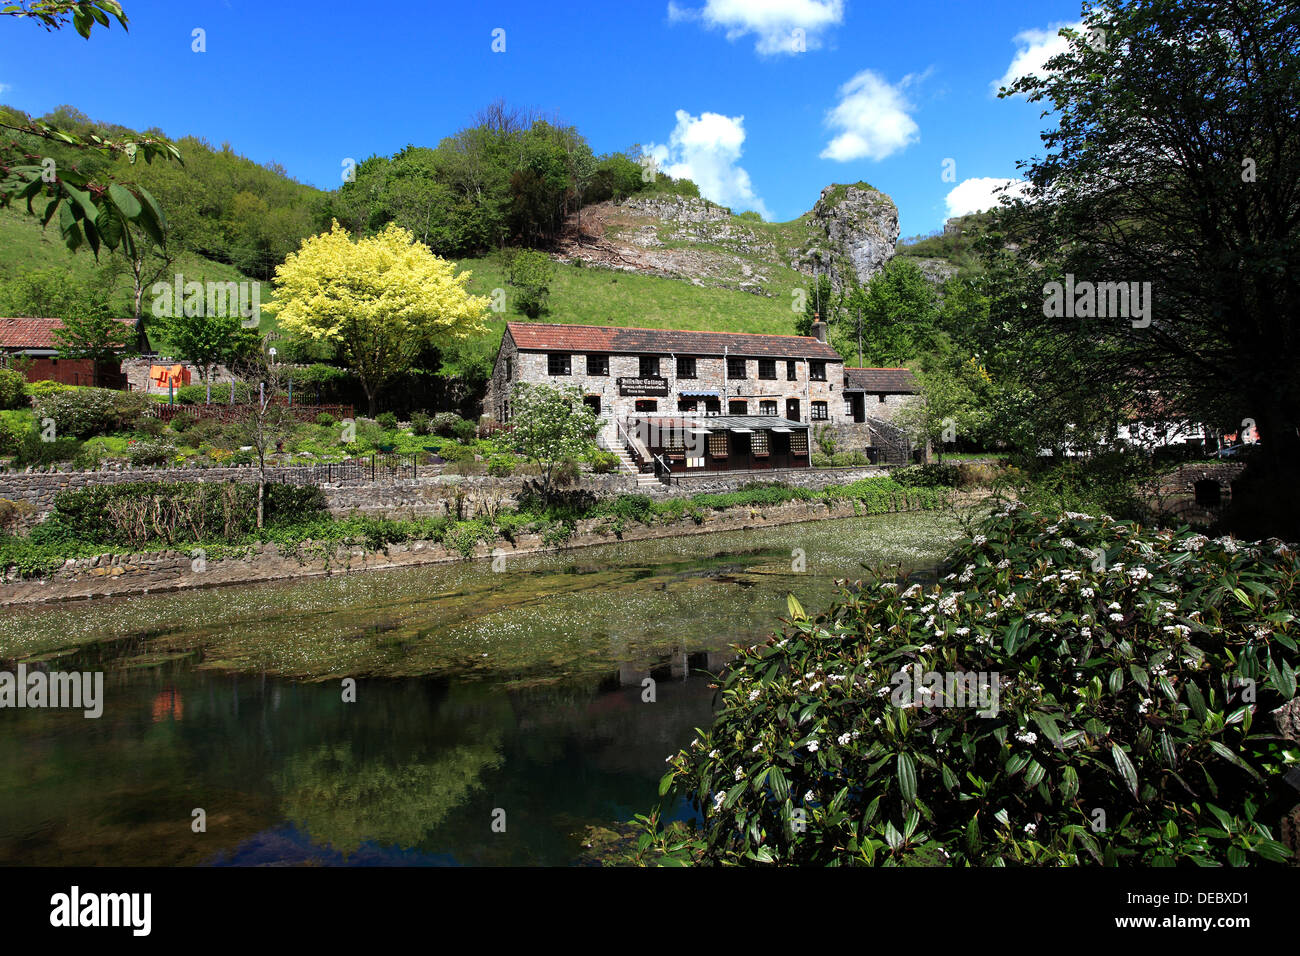 River Yeo under the Limestone cliffs of Cheddar Gorge, Mendip Hills, Somerset County, England, UK Stock Photo